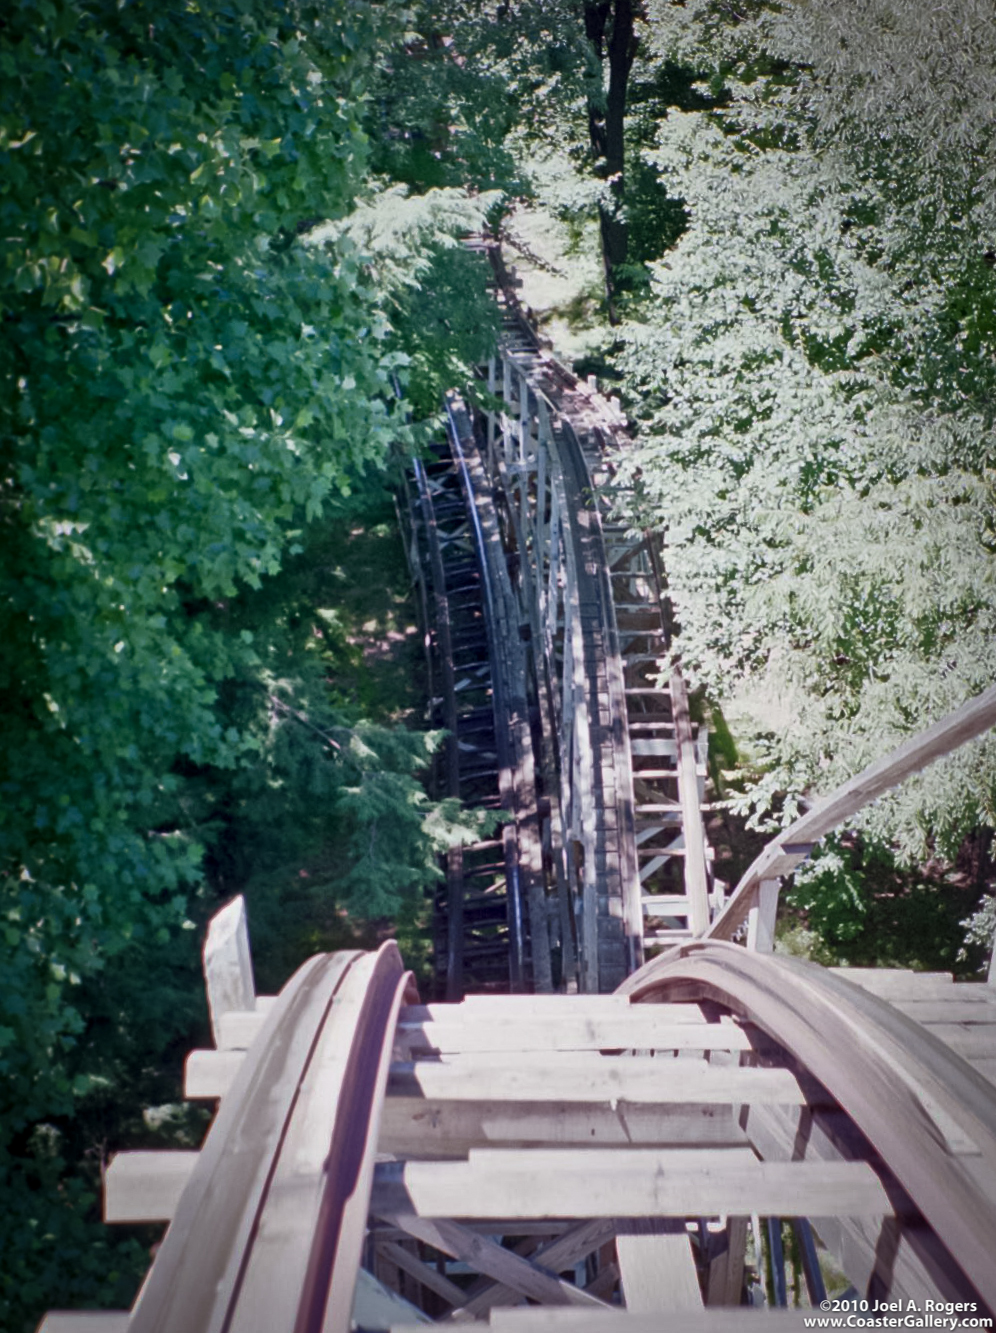 Point of View shot of the Blue Streak roller coaster at Conneaut Lake